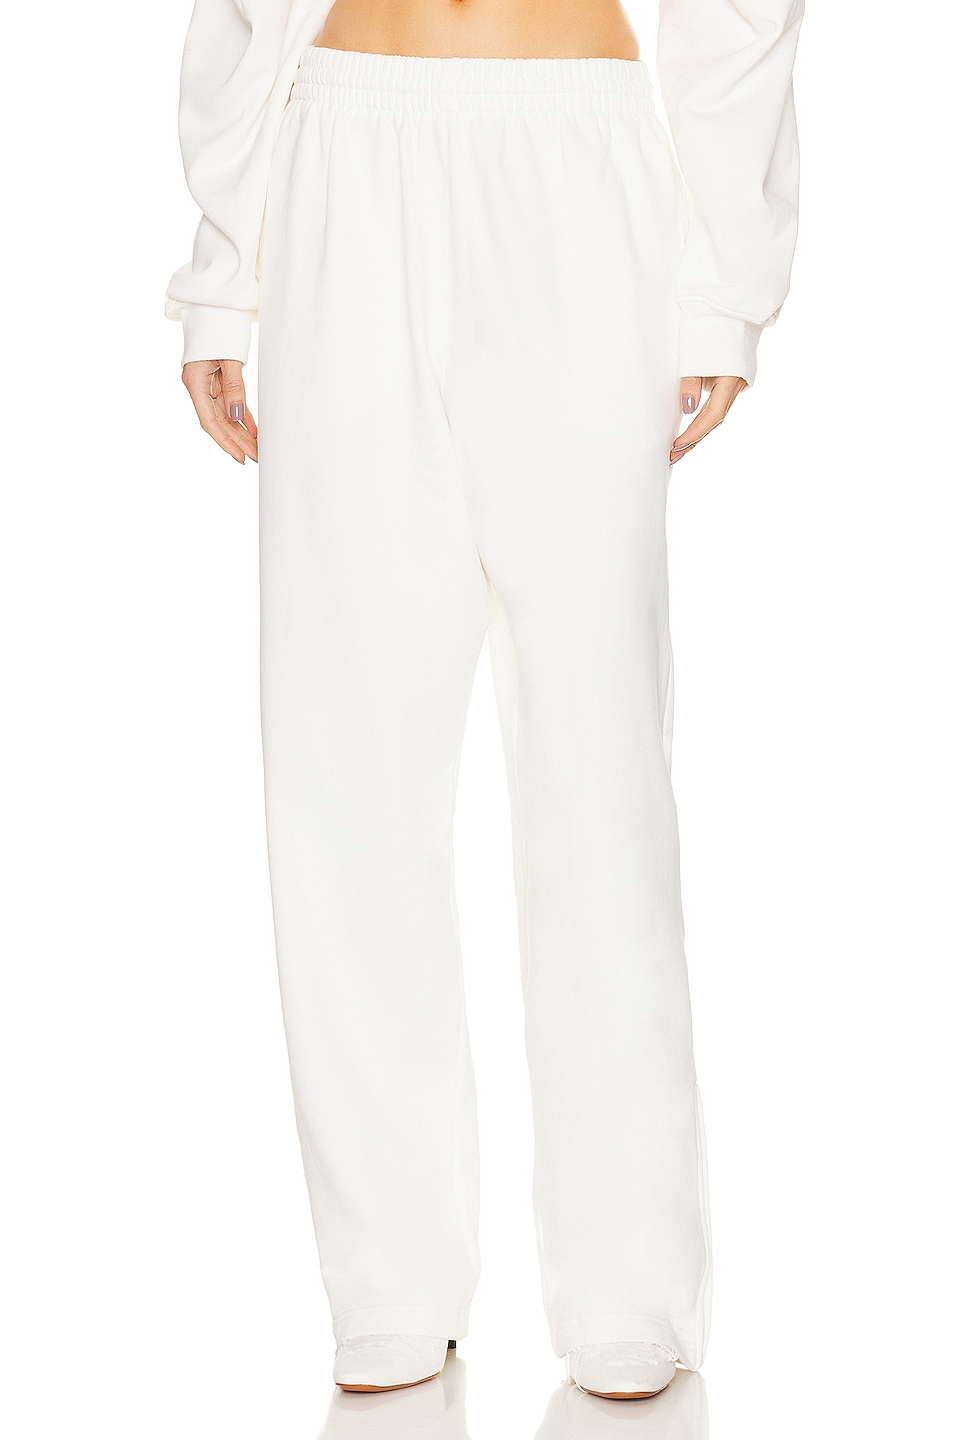 x Hailey Bieber HB Track Pant in White